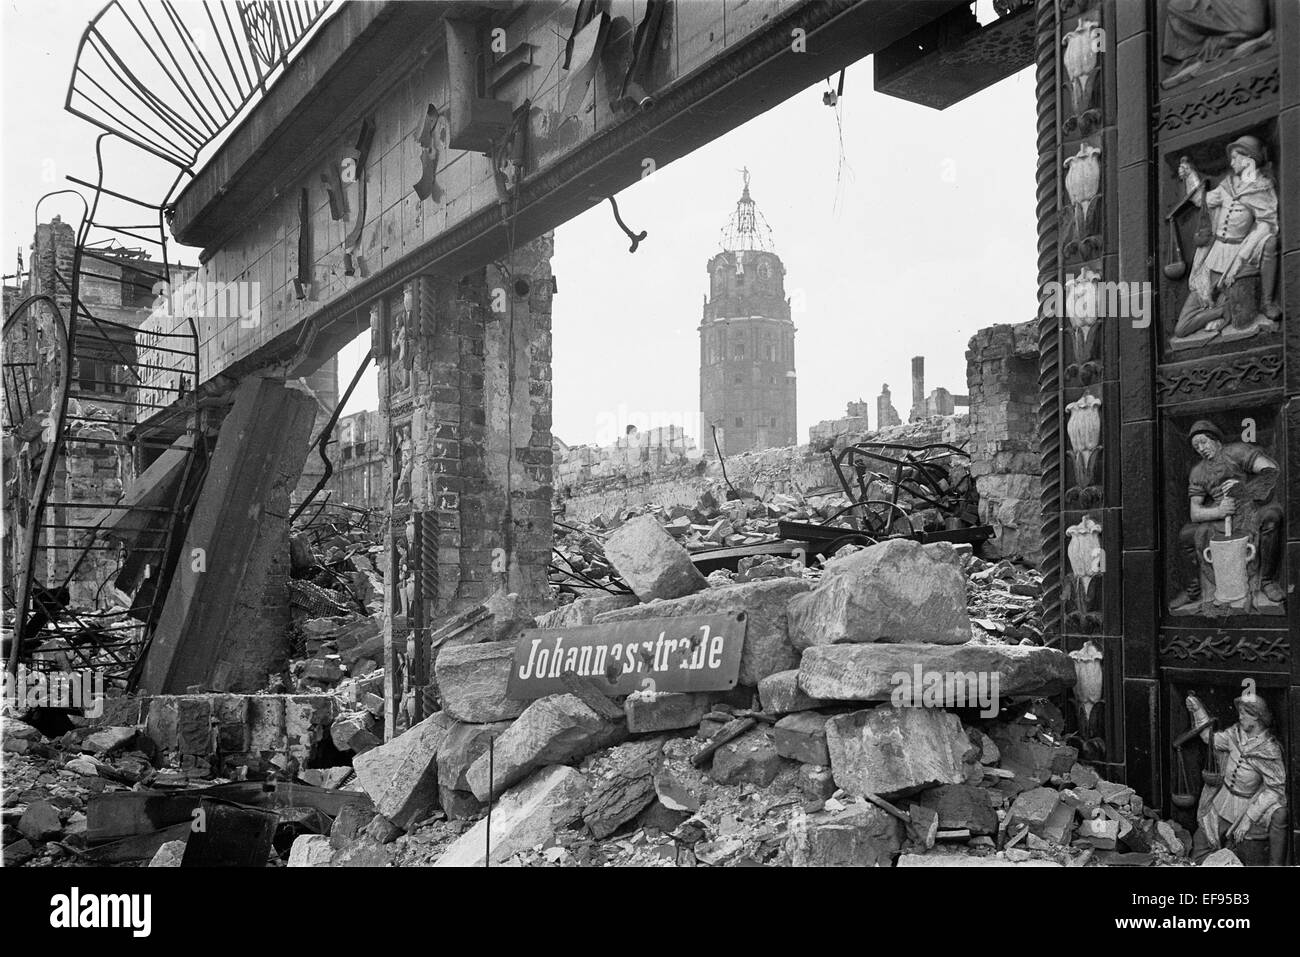 The photo by famous photographer Richard Peter sen. shows the ruins of the Mohrenapotheke in the Johannesstraße (today St. Petersburger Straße) in Dresden. The photo was taken after 17 September 1945. In the back is the destroyed Town Hall tower. Especially the Allied air raids between 13 and 14 February 1945 led to extensive destructions of the city.  Photo: Deutsche Fotothek / Richard Peter sen. - NO WIRE SERVICE Stock Photo